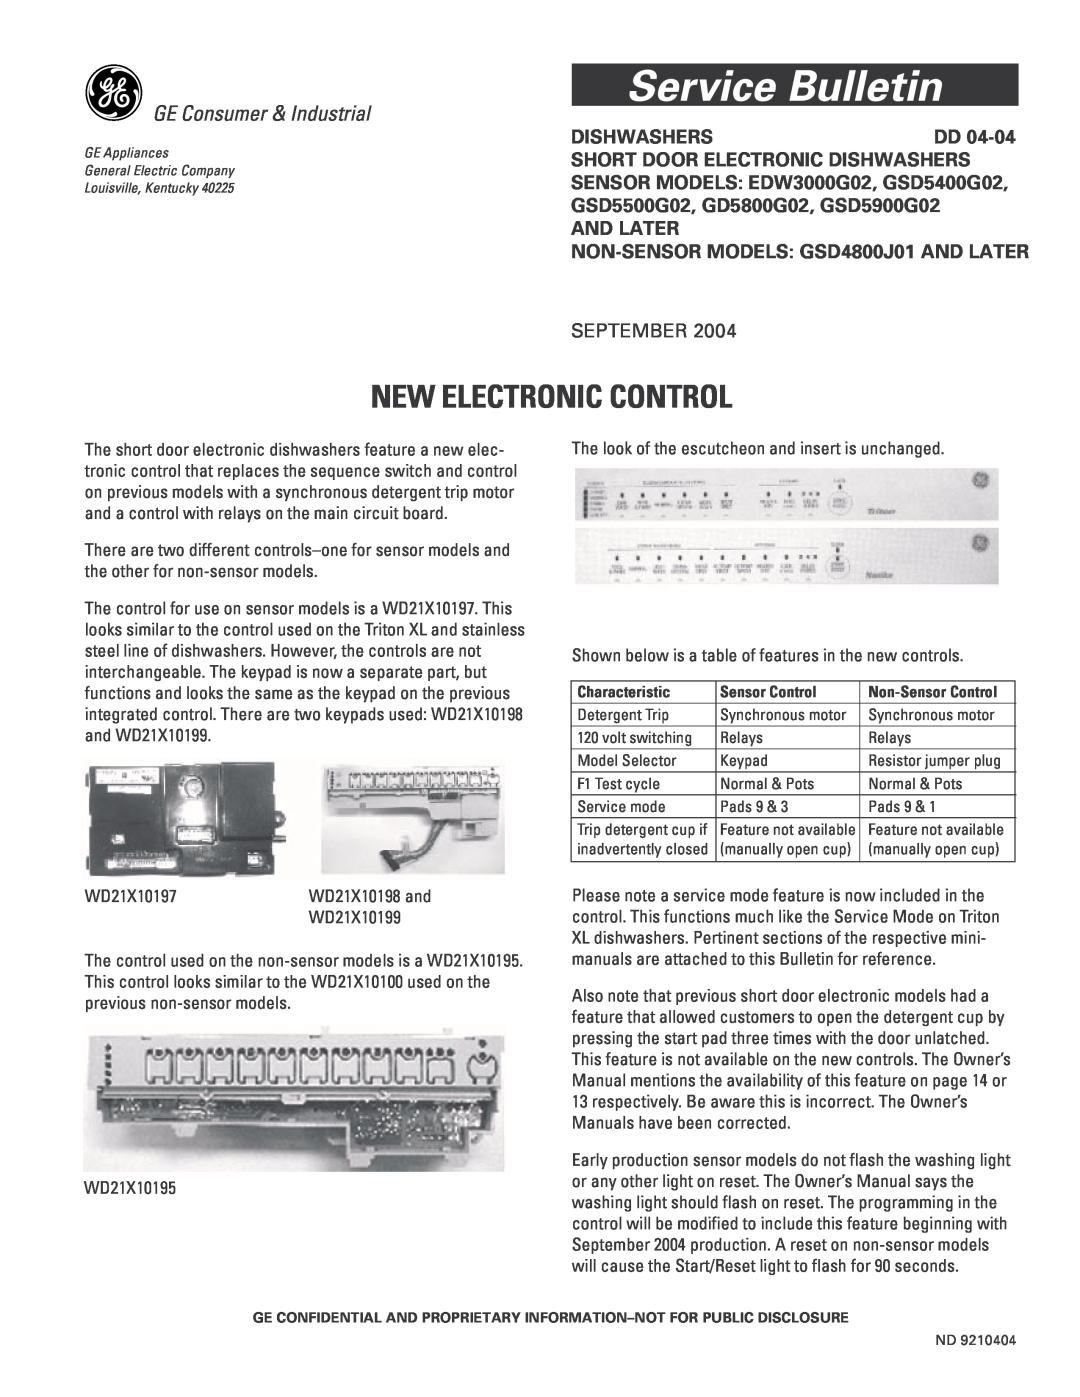 GE GSD5400G02 owner manual Dishwashers, AND LATER NON-SENSORMODELS GSD4800J01 AND LATER, Service Bulletin, September 